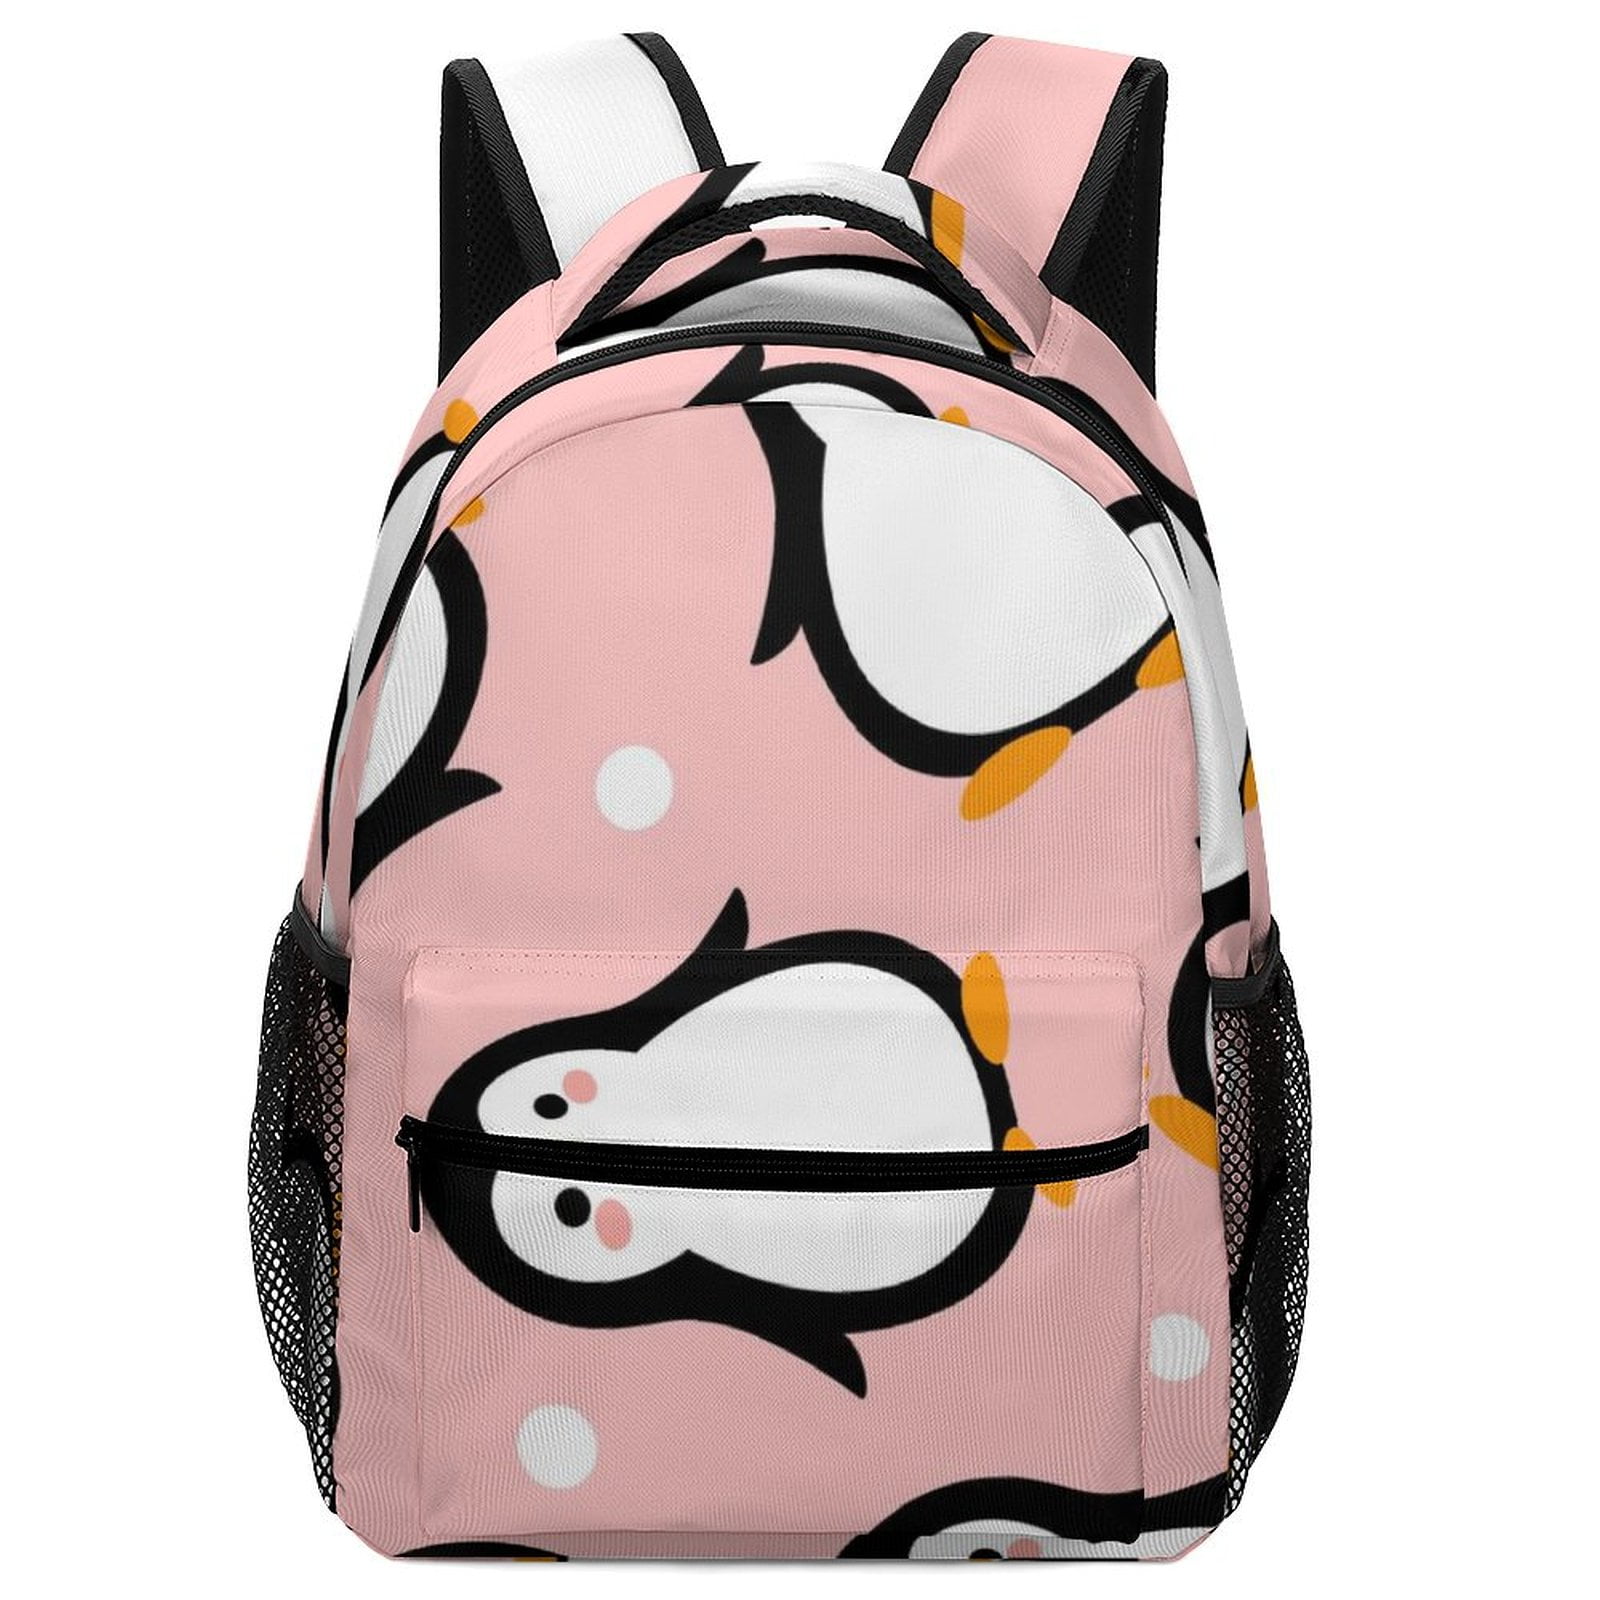 LAKIMCT Kids Backpack, Cute Penguin Schoolbag for Boys Girls with ...